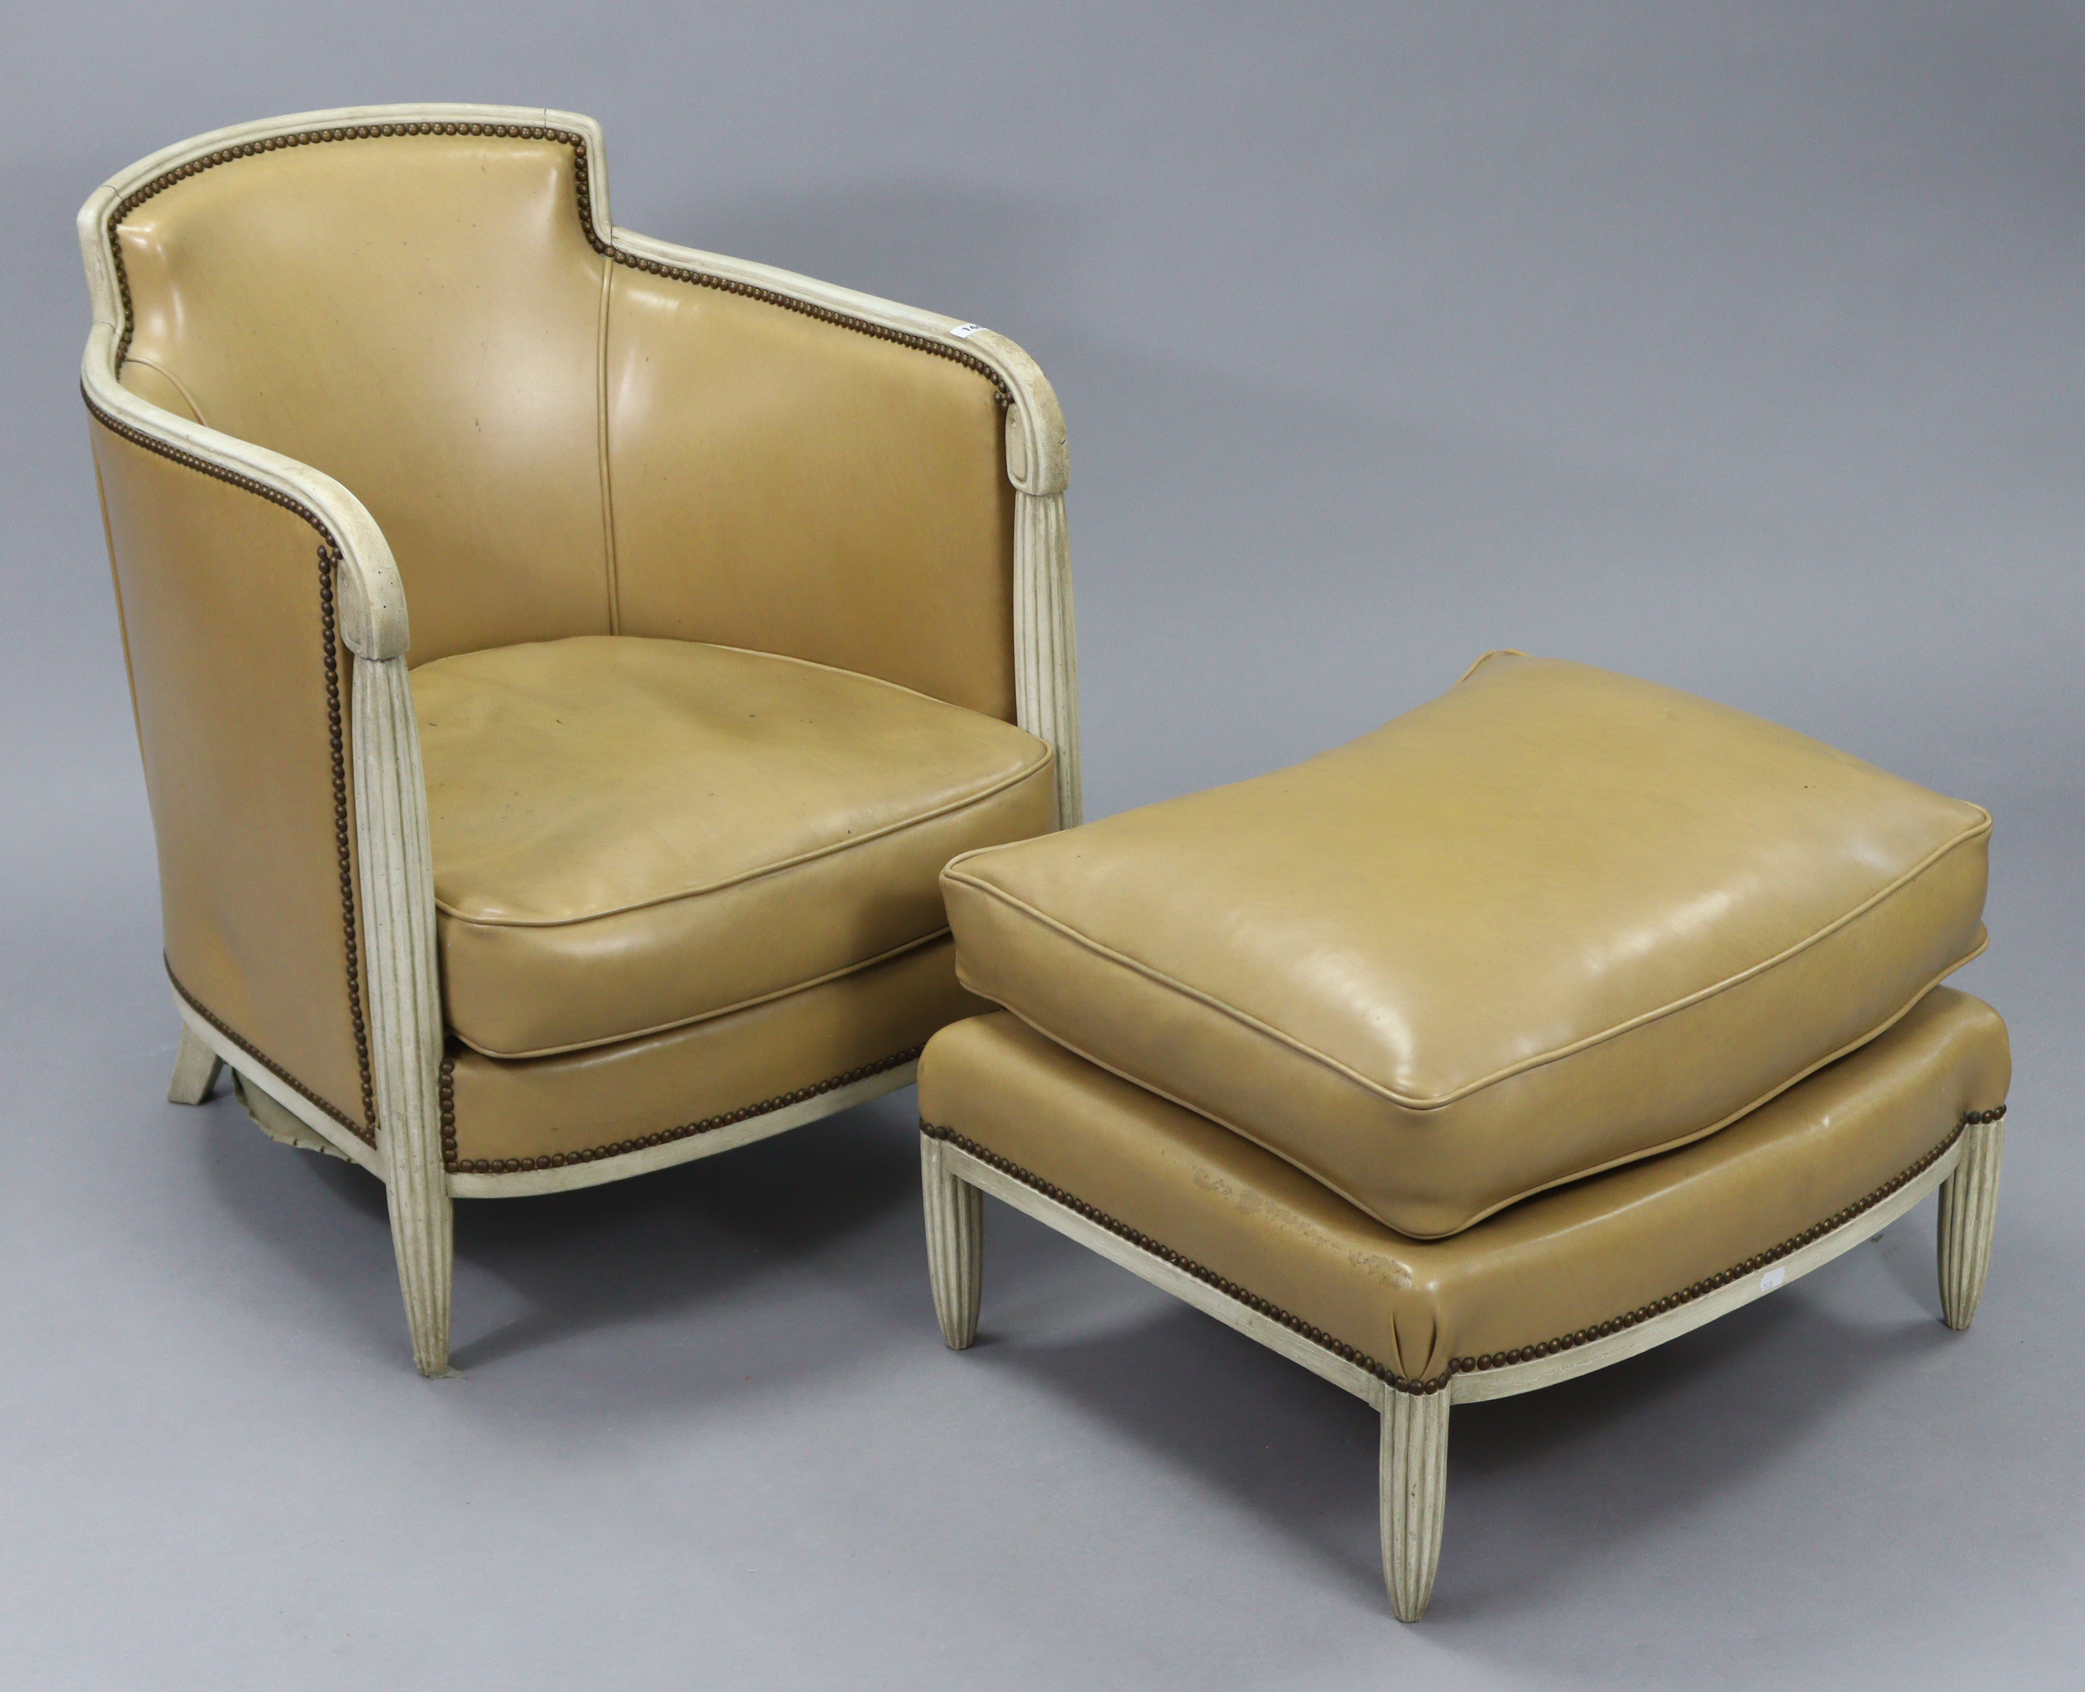 A cream-finish wooden frame tub-shaped easy chair in the 19th century continental style, upholstered